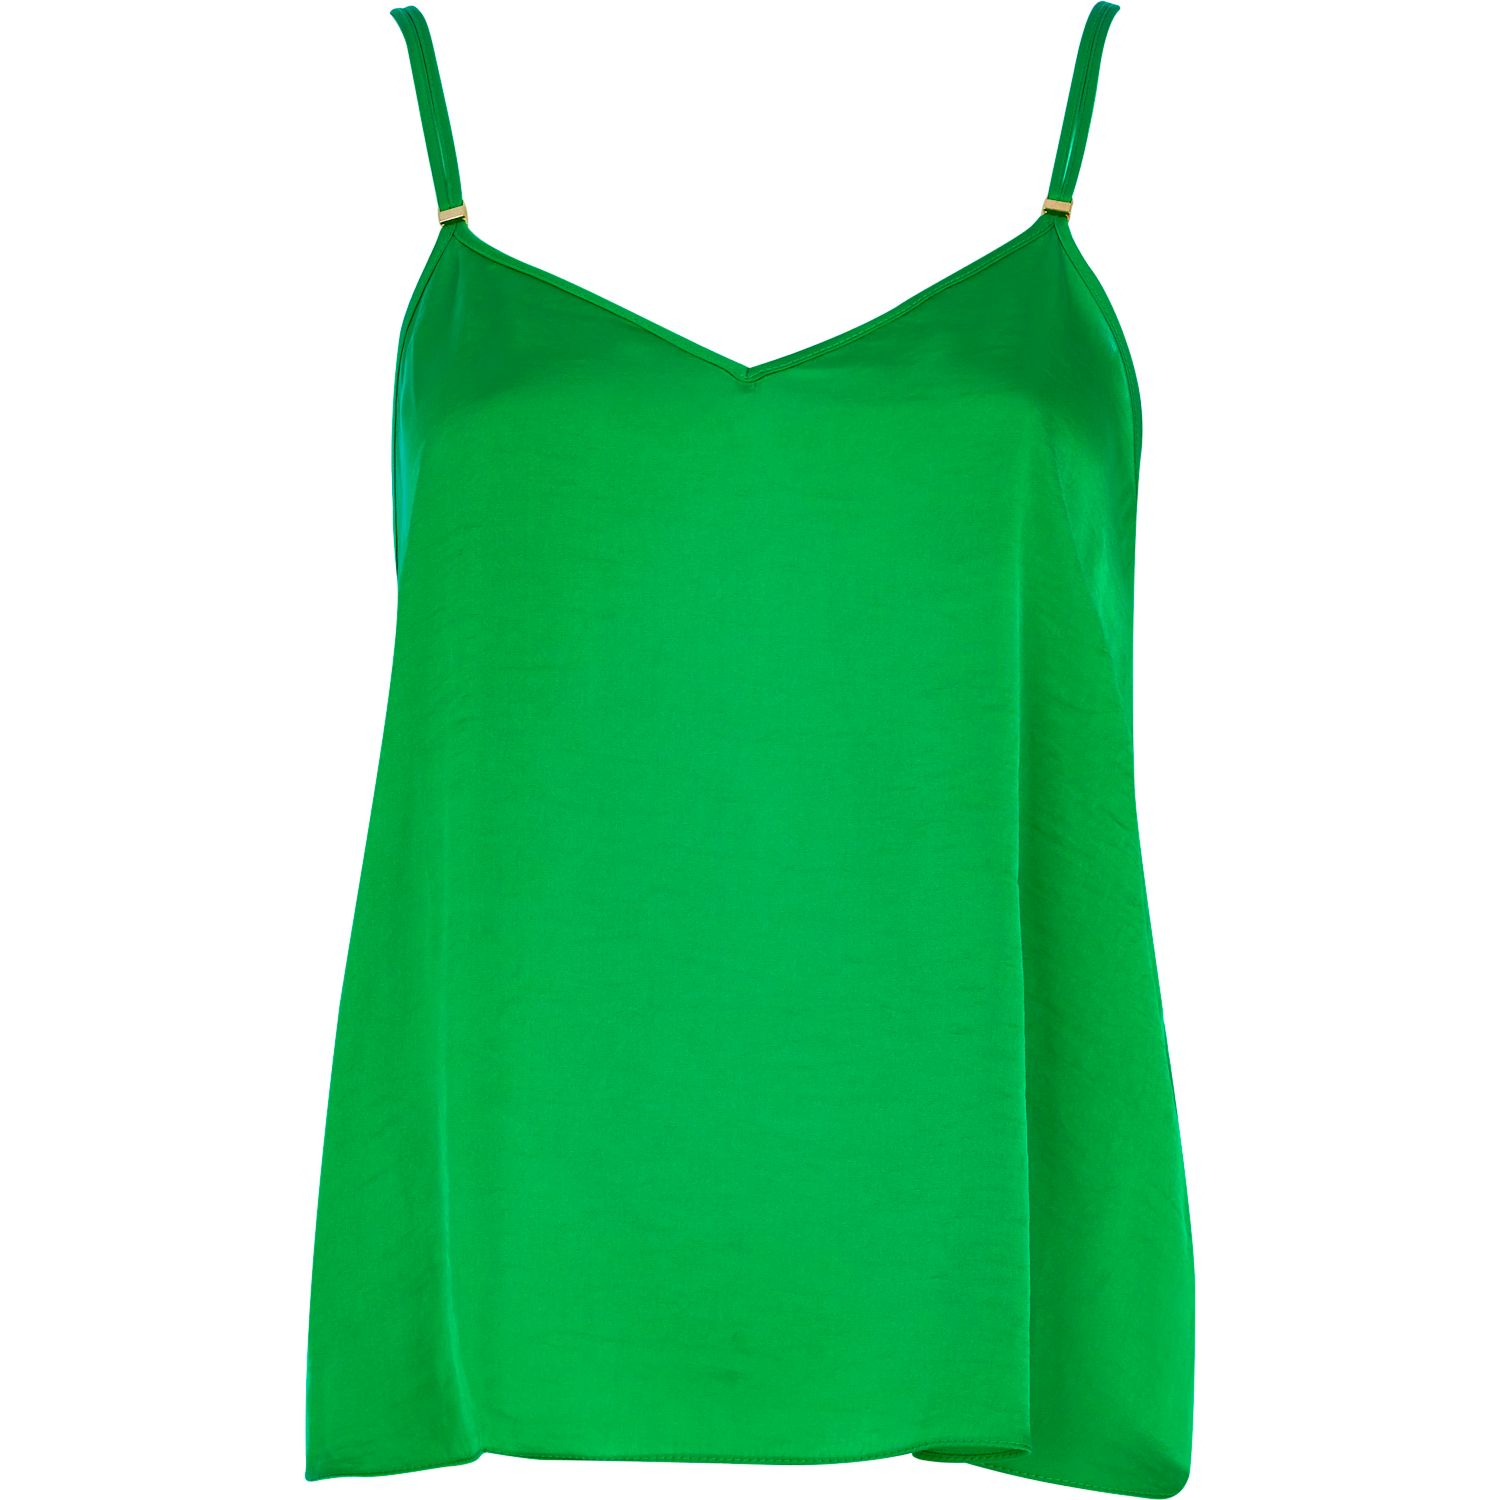 River island Bright Green Silky V Neck Cami Top in Green | Lyst